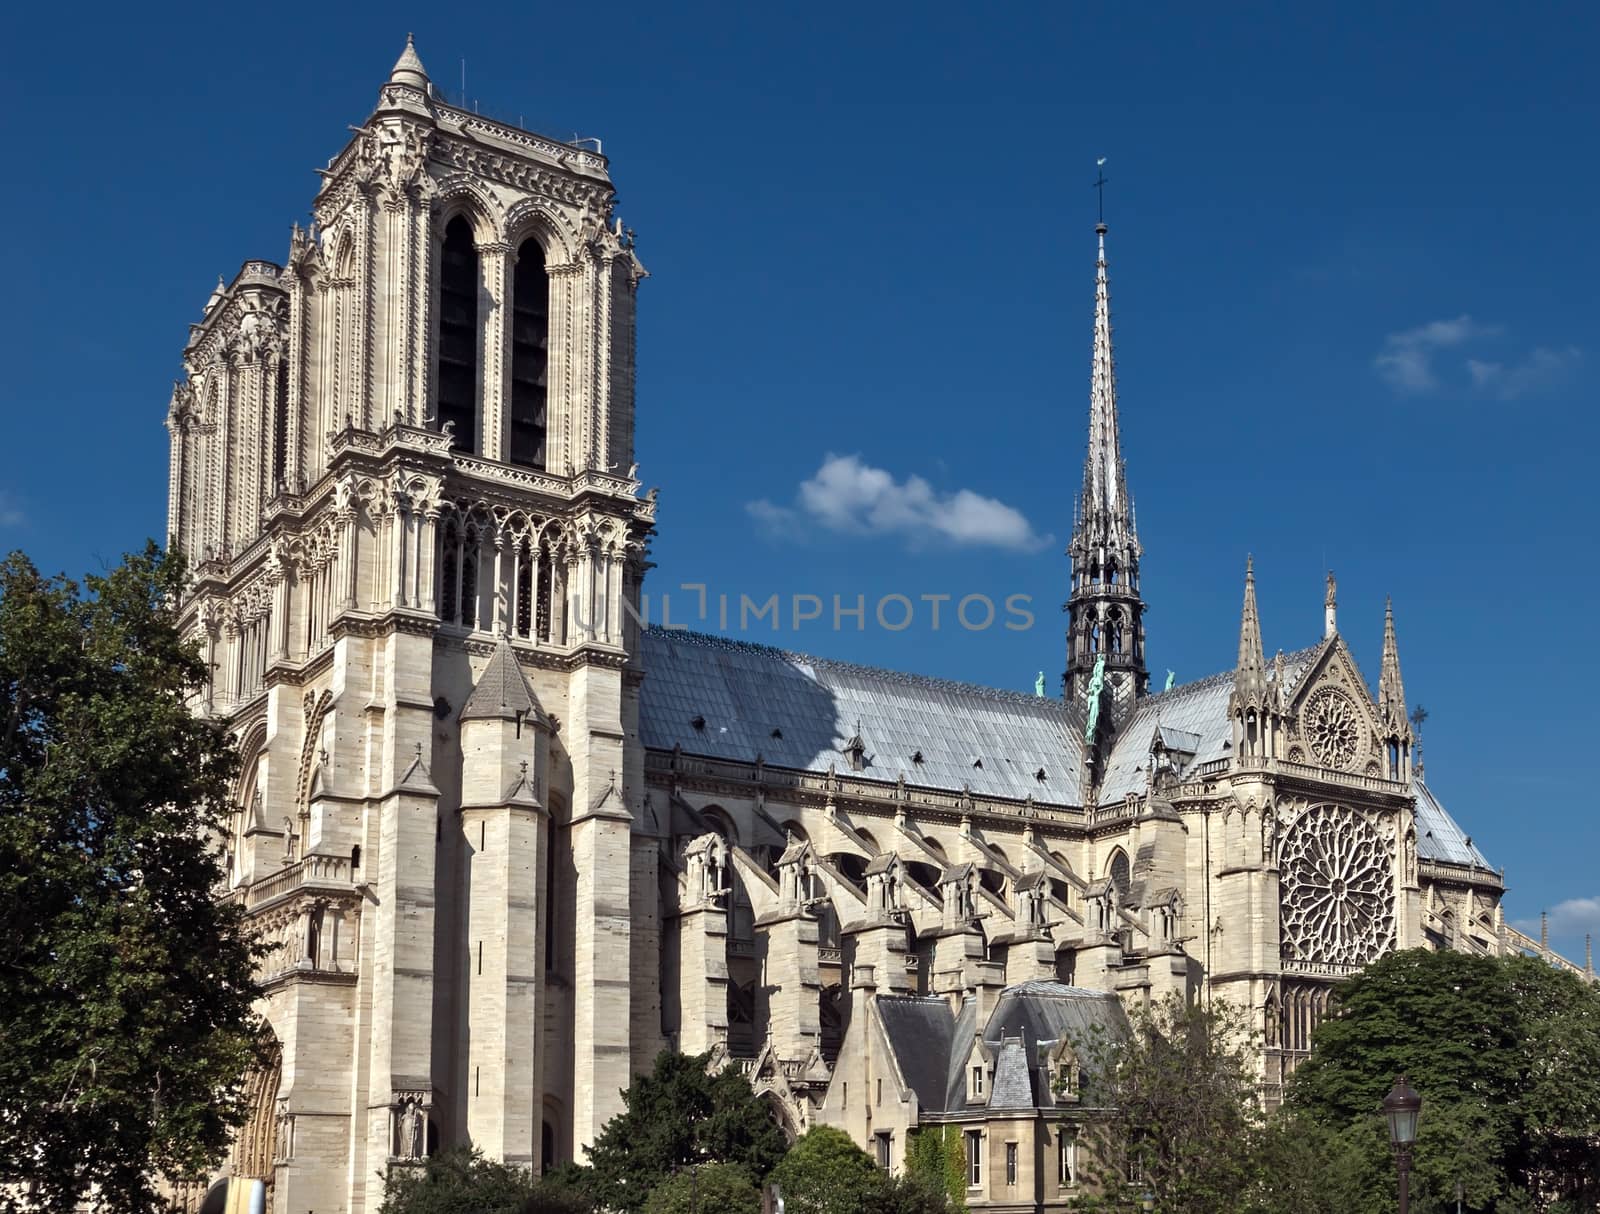 View of the Cathedral of Notre Dame in Paris, France.